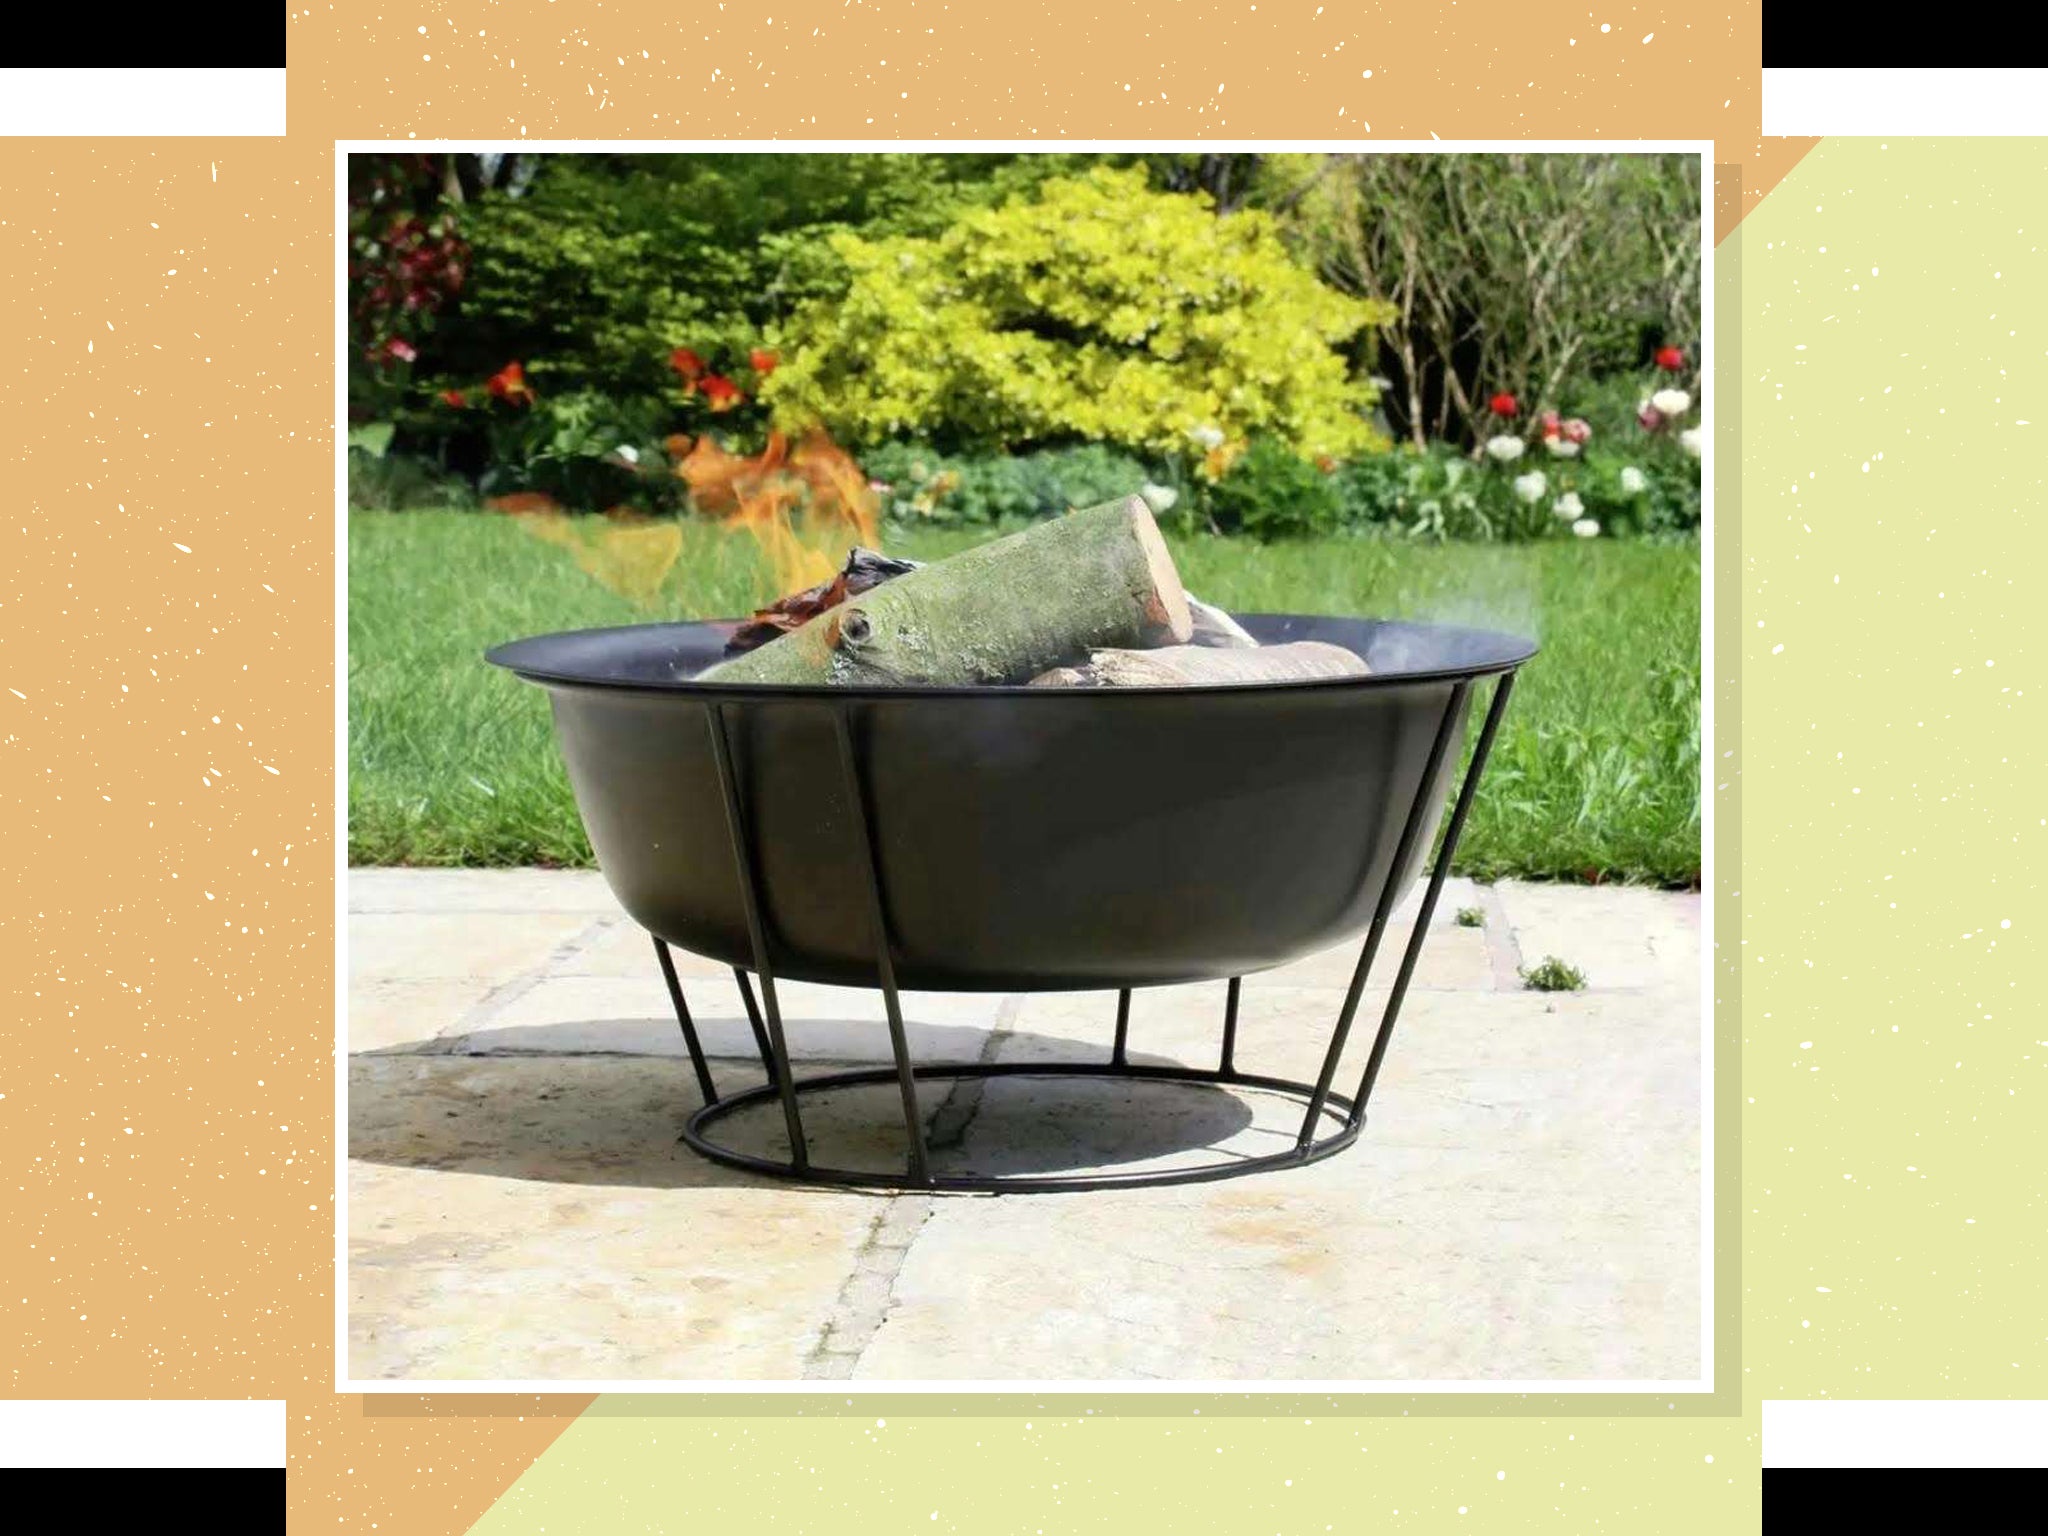 The fire pit is ideal for roasting marshmallows or keeping you warm on cool nights